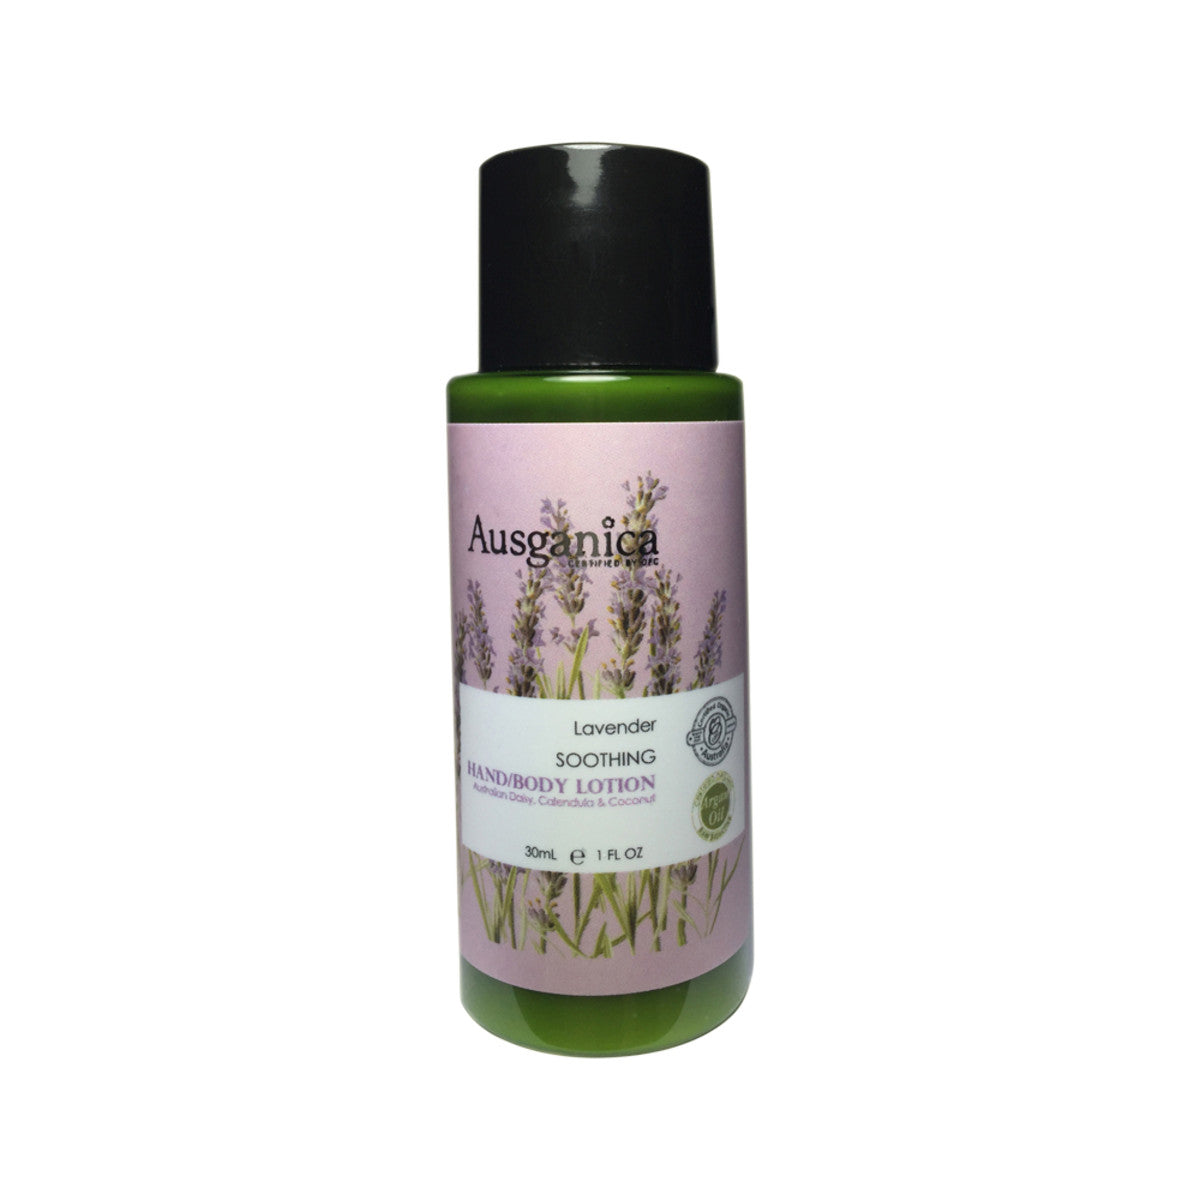 Ausganica - Lavender Soothing Hand Body Lotion